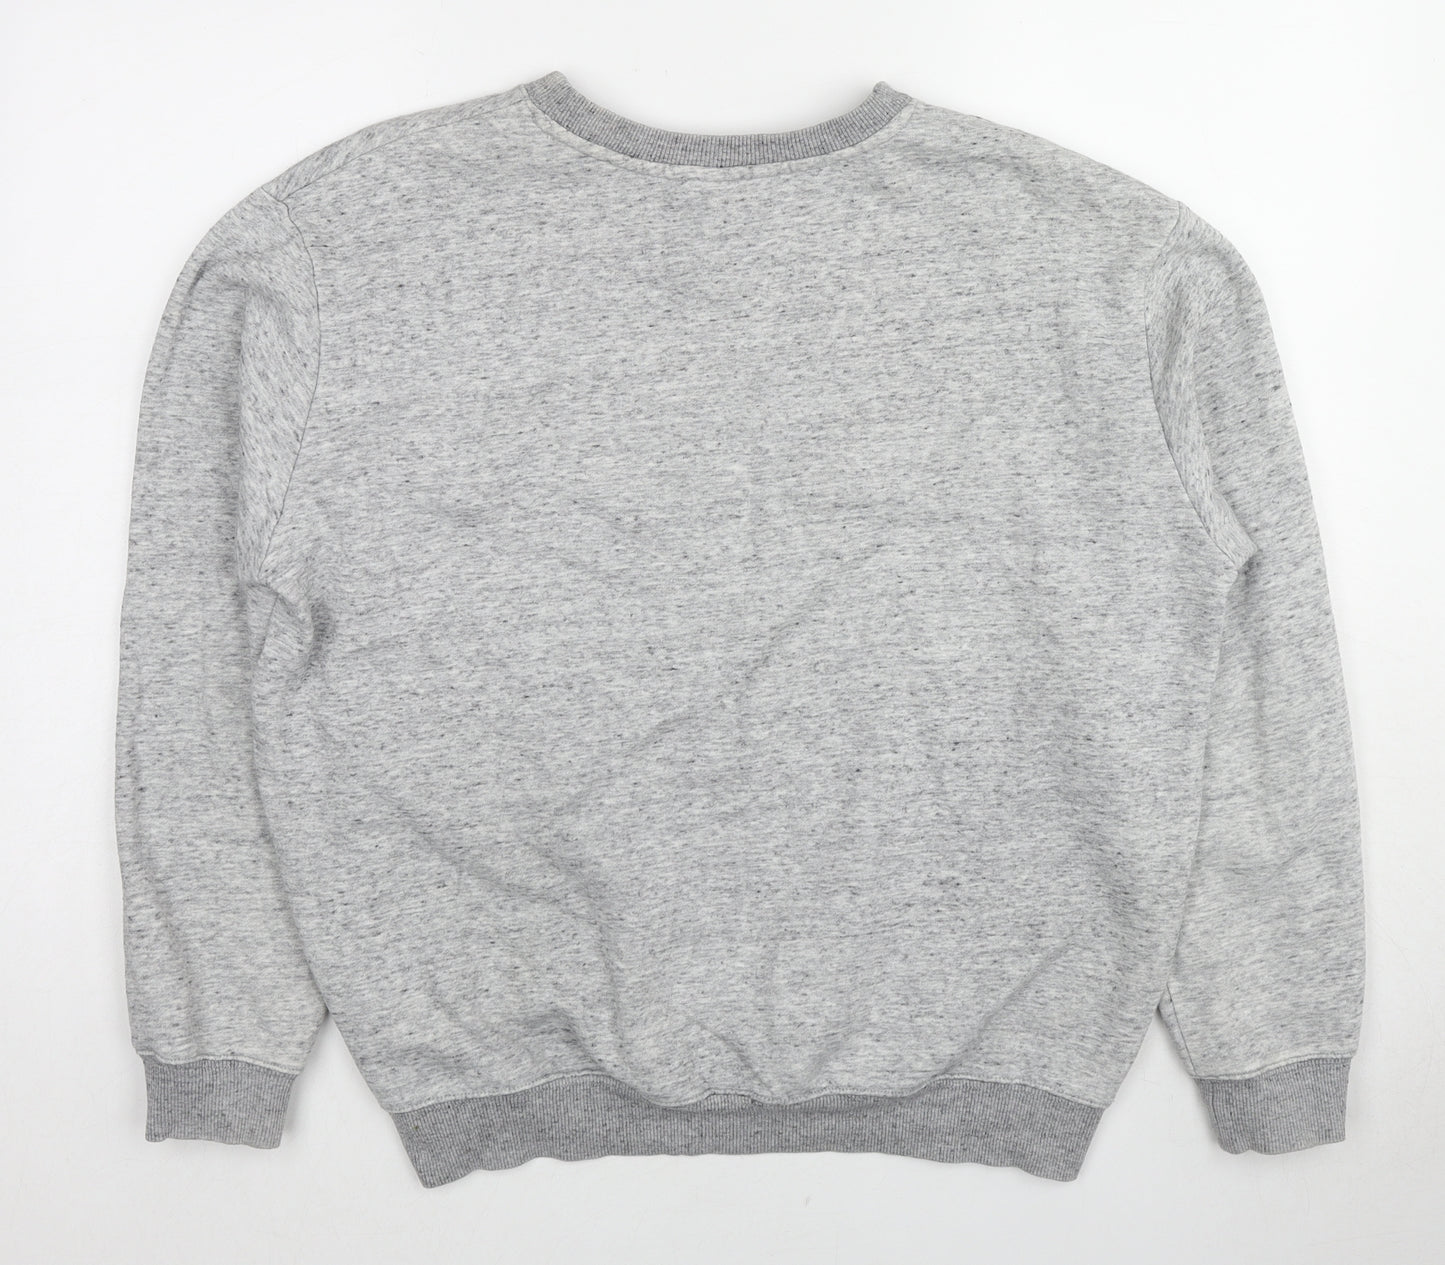 NEXT Womens Grey Polyester Pullover Sweatshirt Size L Pullover